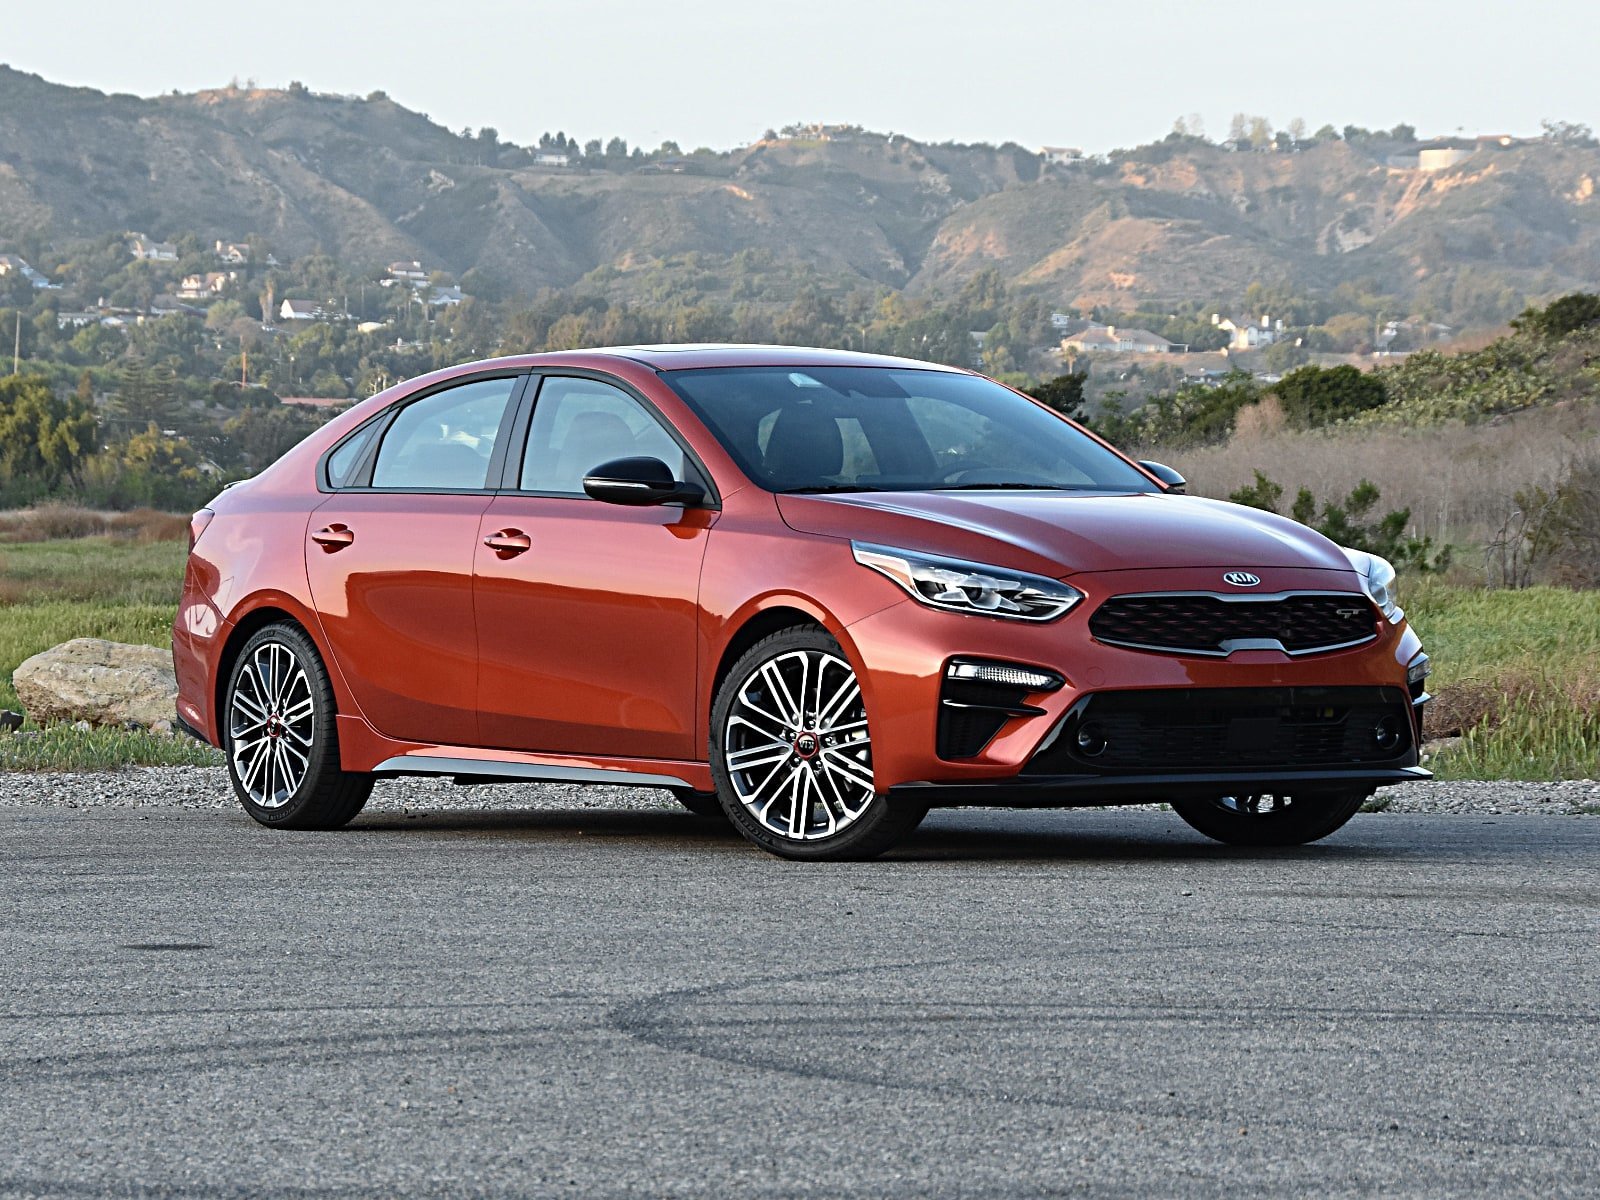 Video Review: 2020 Kia Forte Expert Test Drive